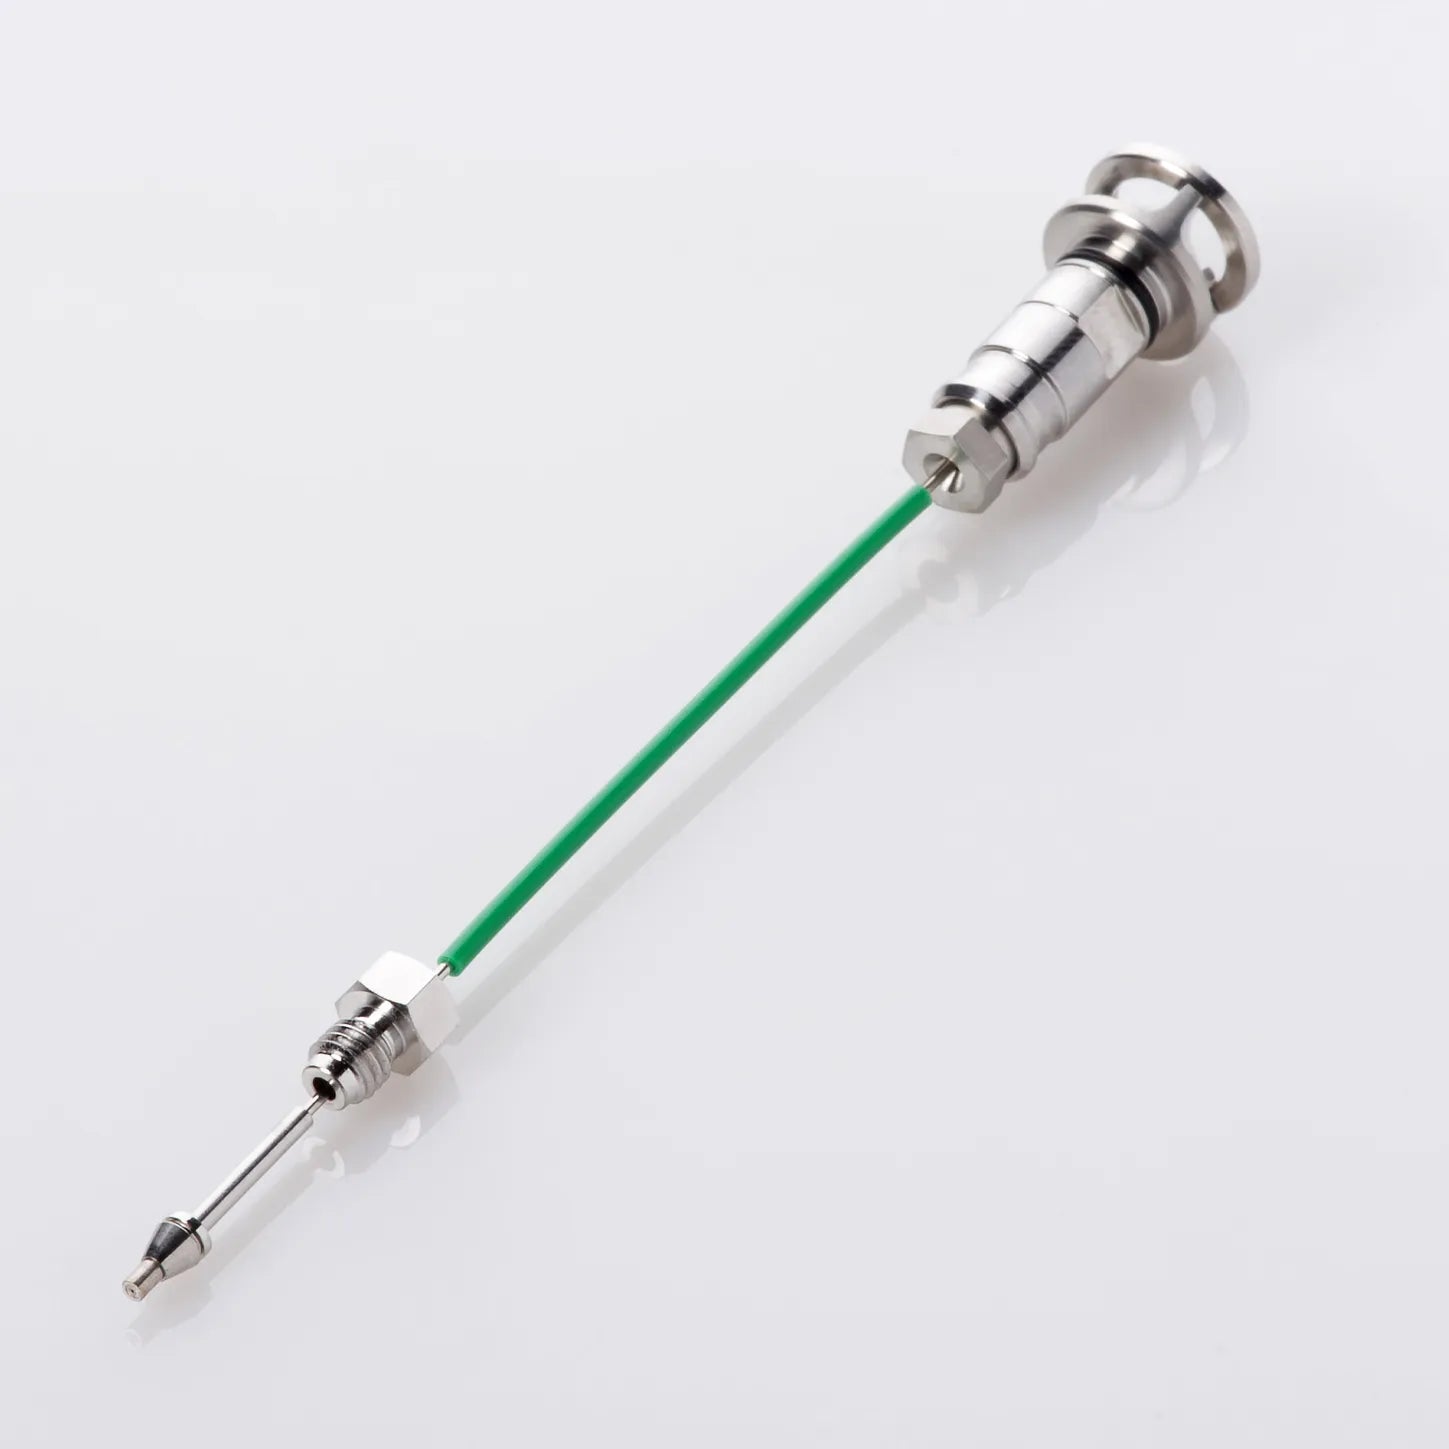 Needle Seat, 0.17mm ID, 0.8 mm OD, 600 bar, Comparable to Agilent # G1367-87017